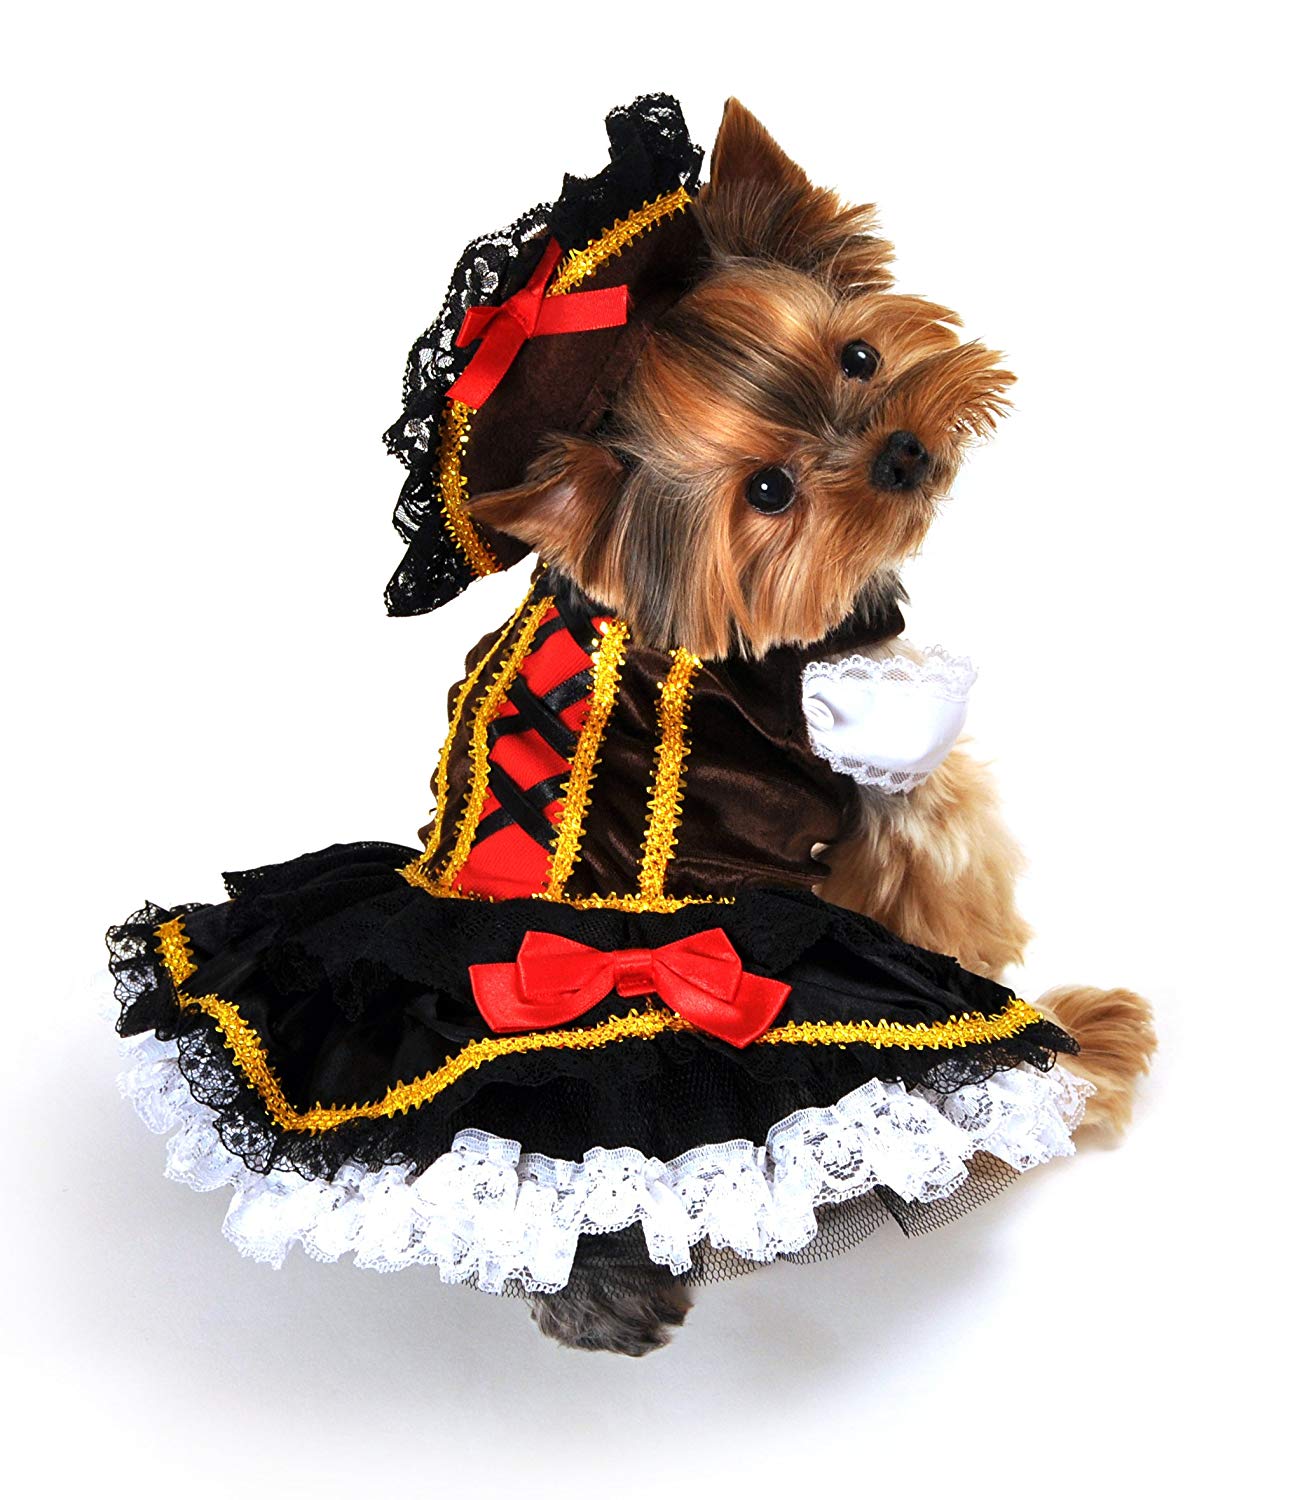 Swashbuckler Pirate Dog Costume Detailed Black Velveteen Petticoat Dress and Hat - My Poochie's Paradise